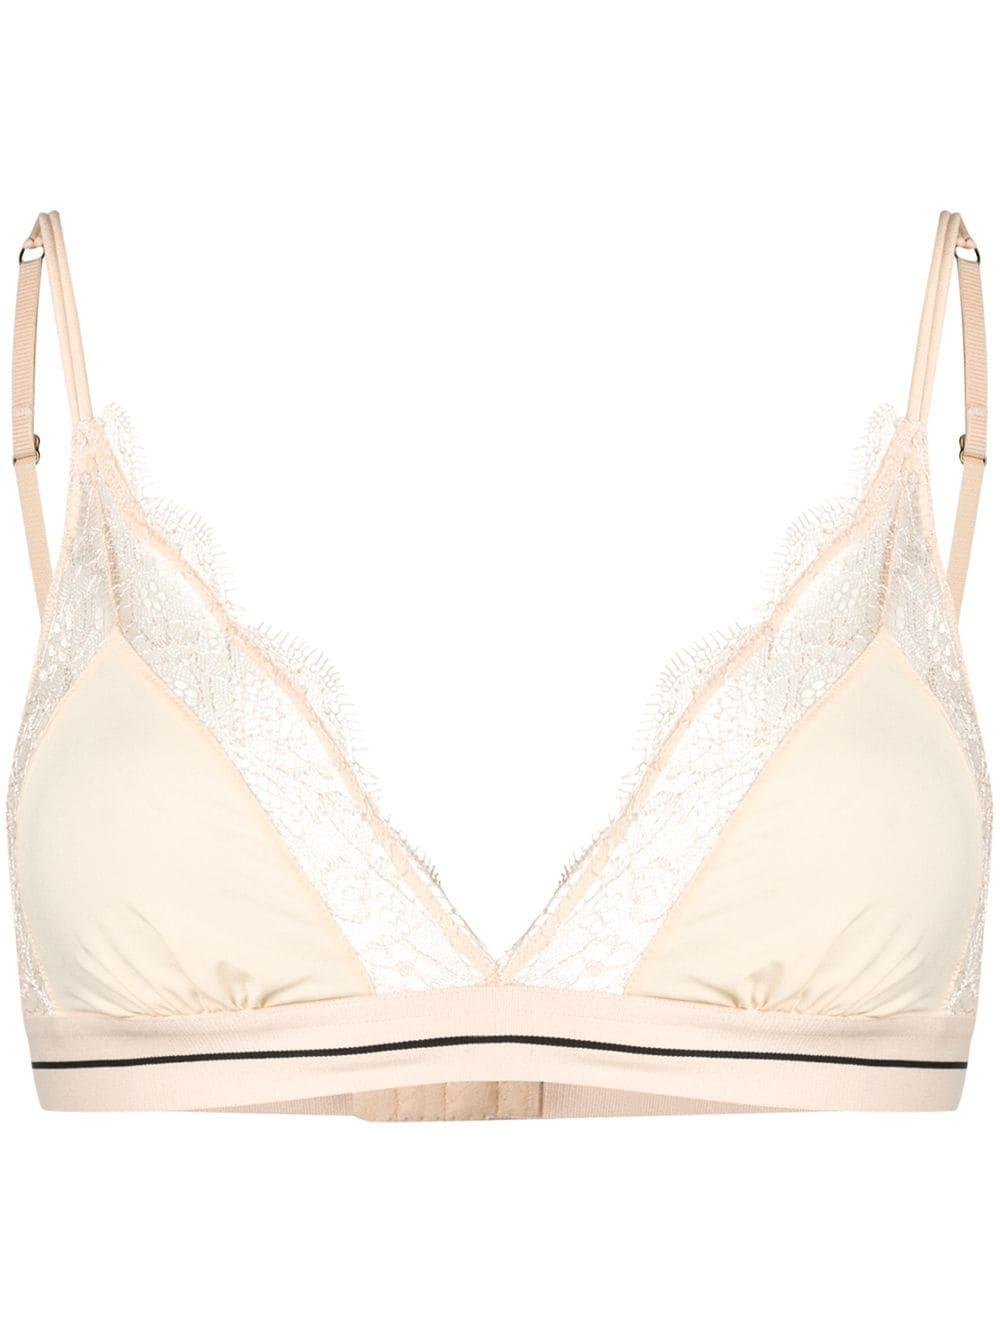 lace-detail bra top by LOVE STORIES